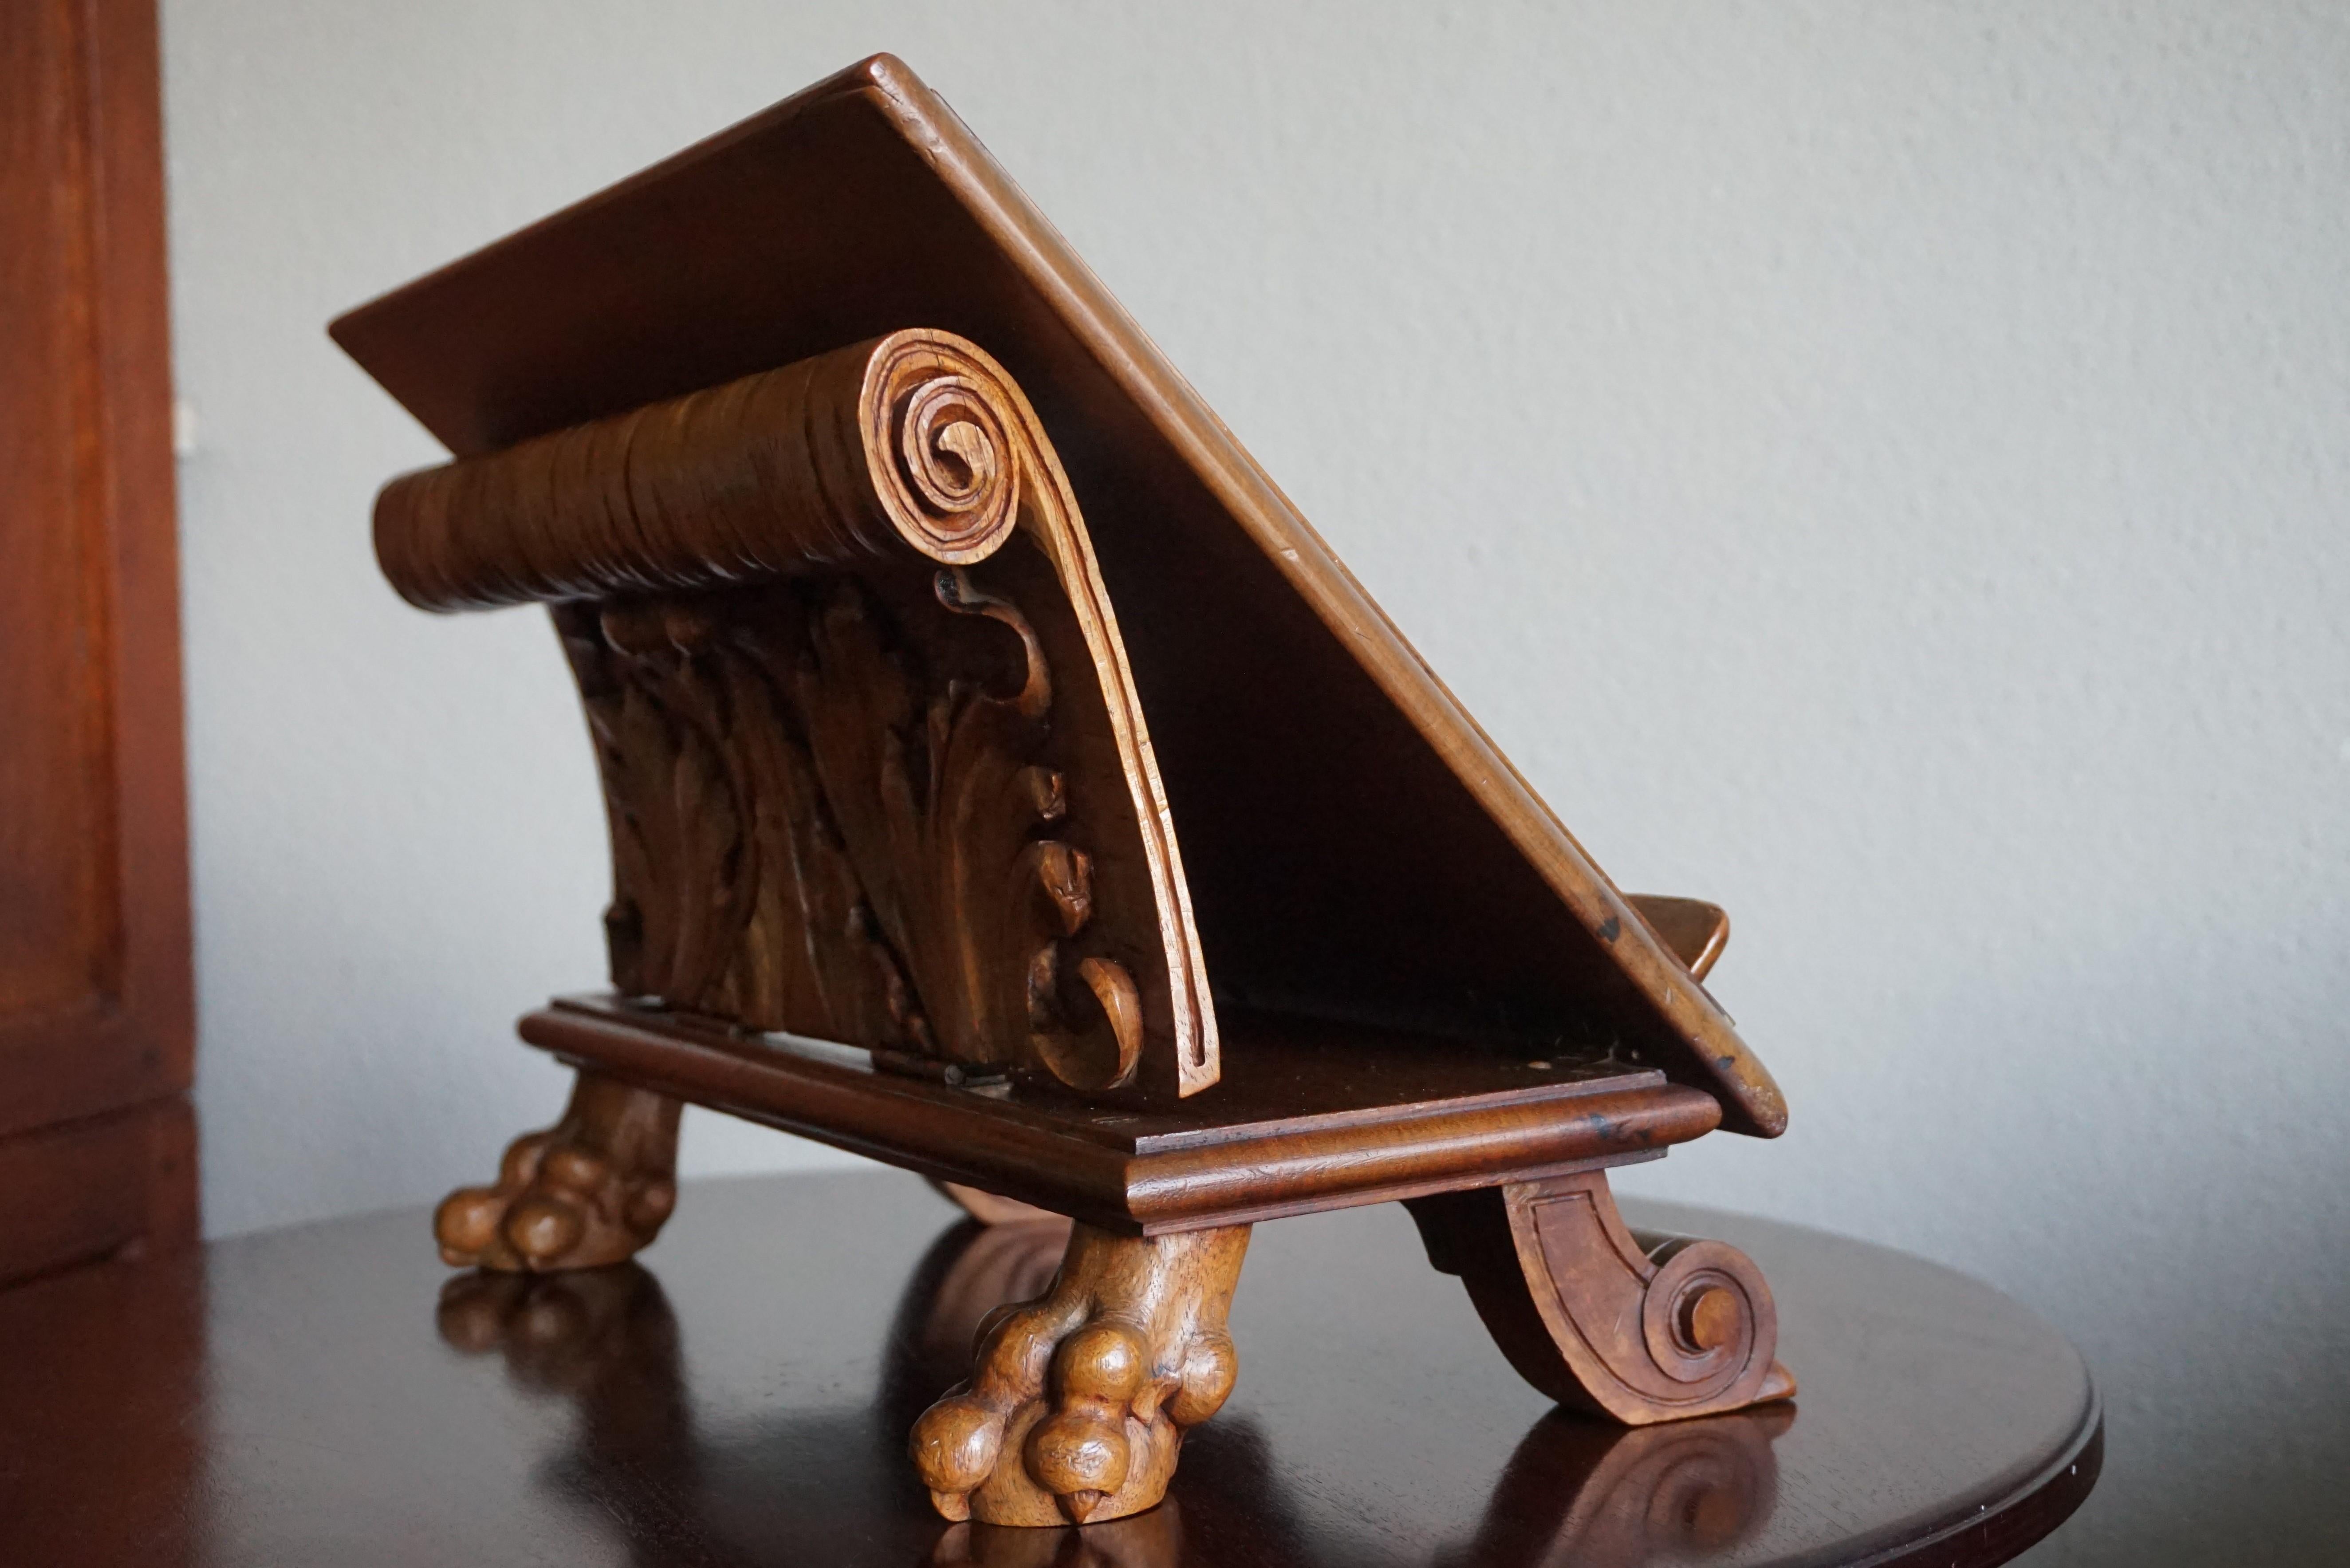 19th Century Antique & Unique Adjustable Bookstand with Hand Carved Leaf Pattern & Claw Feet